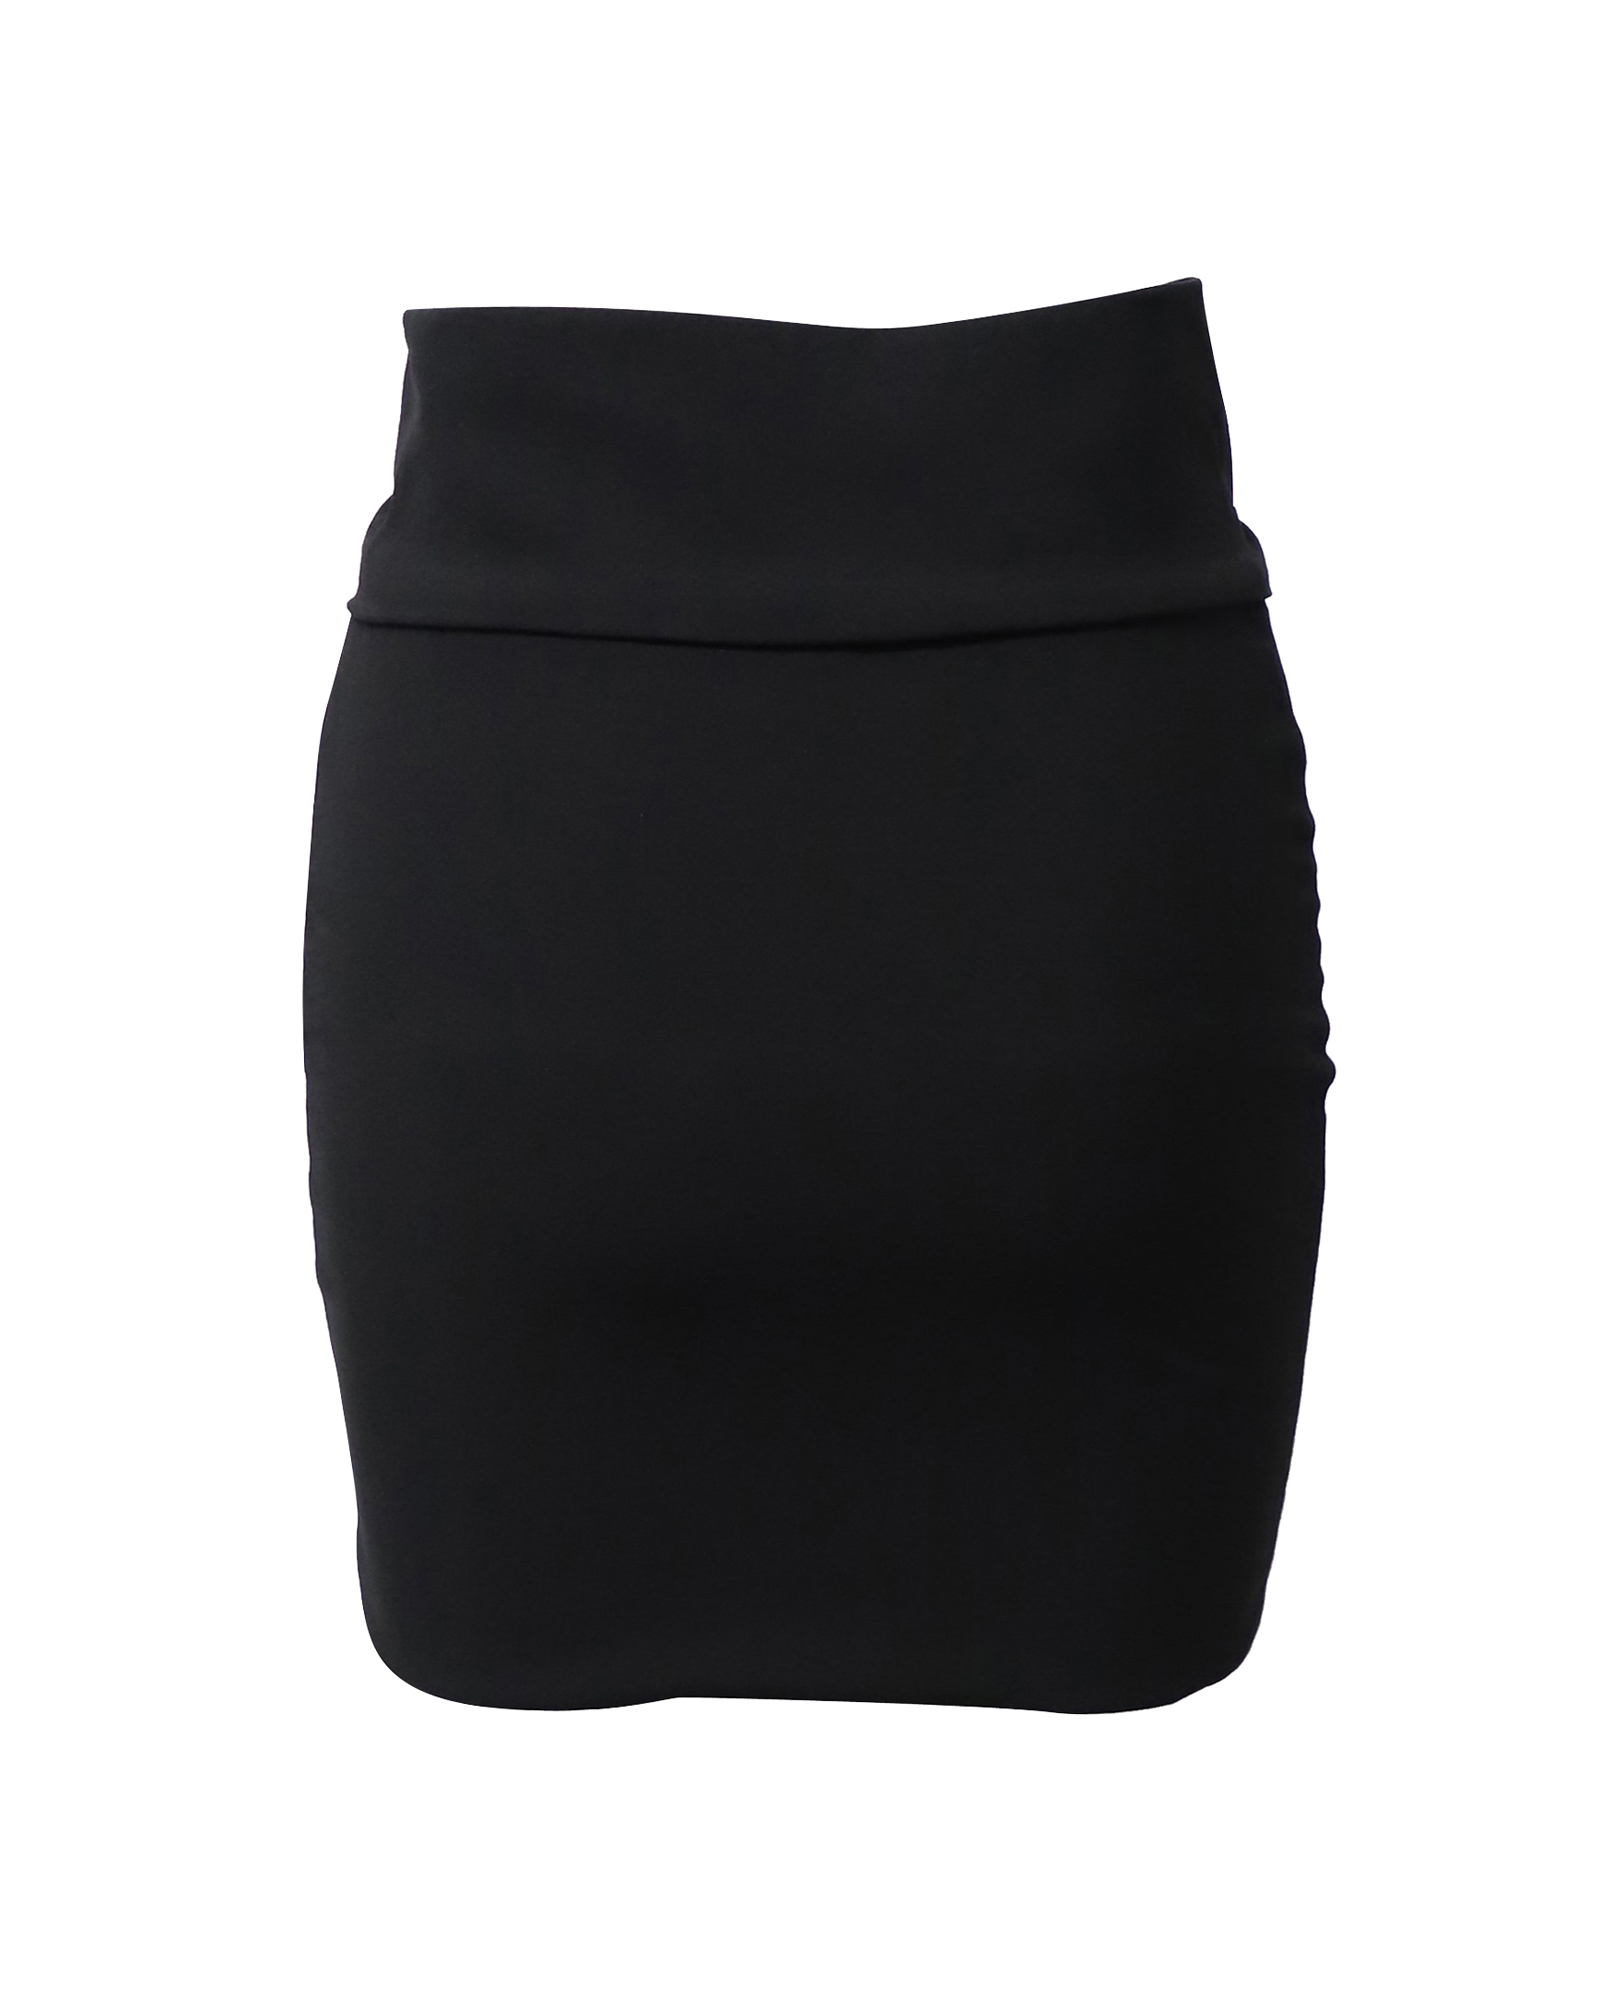 Gathered Pencil Skirt with Exposed Zipper in Black Acetate